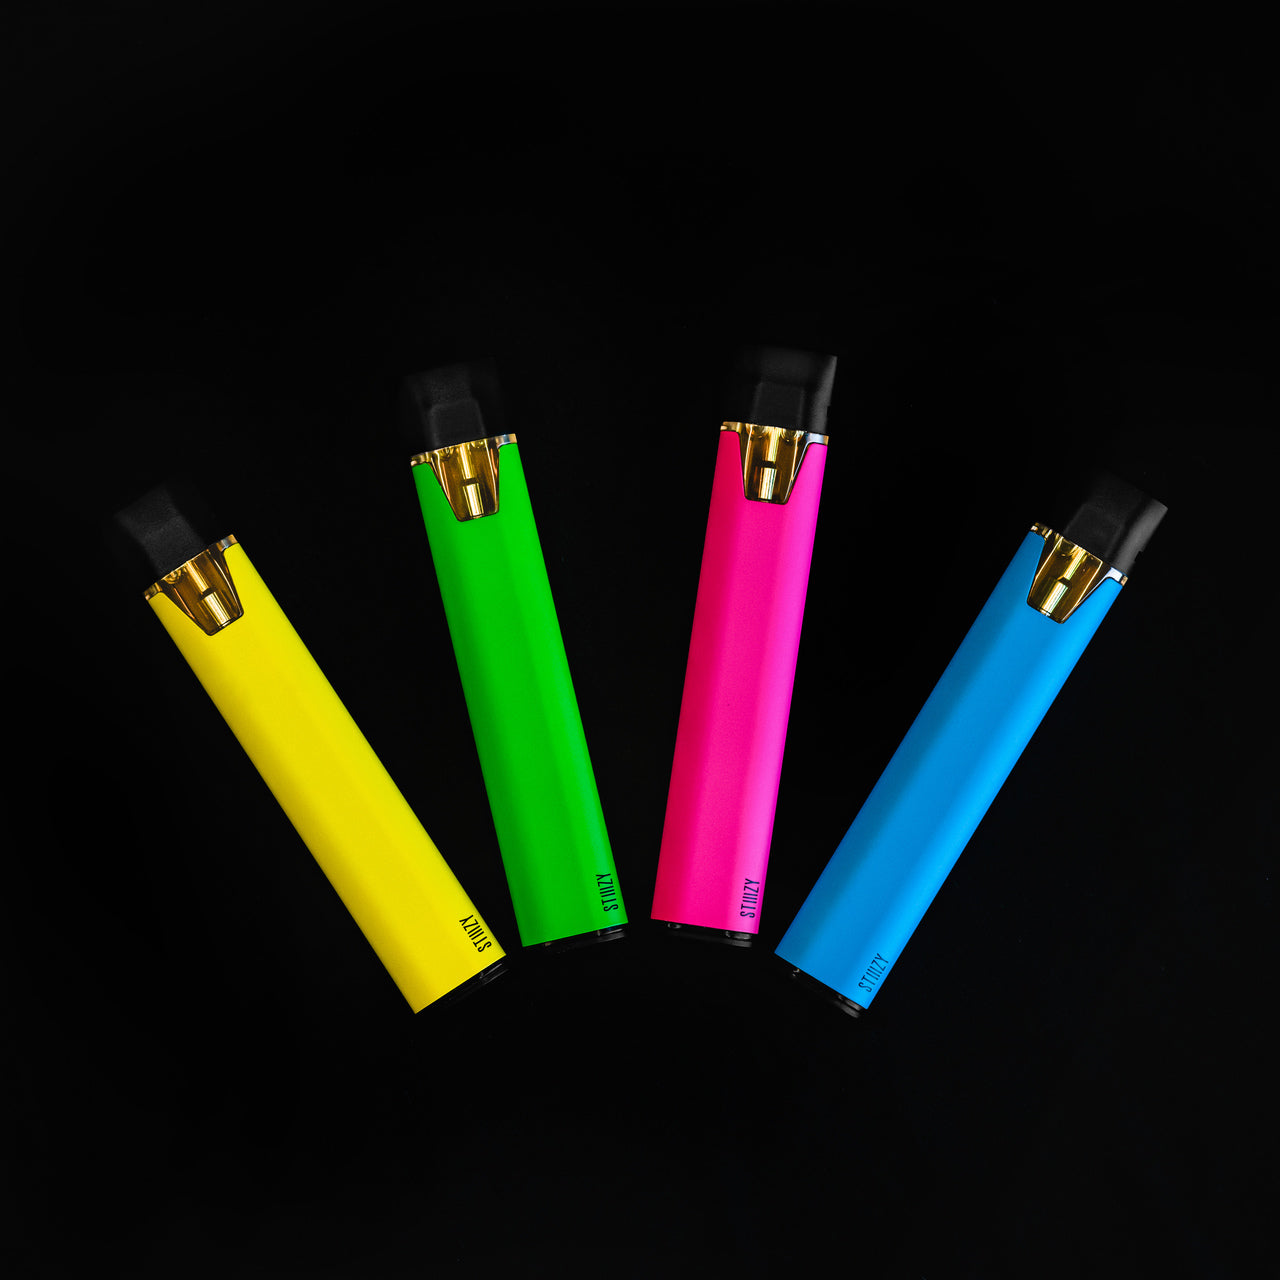 A yellow, green, pink, and blue STIIIZy weed vape pen with THC distillate are spread out over a black surface.